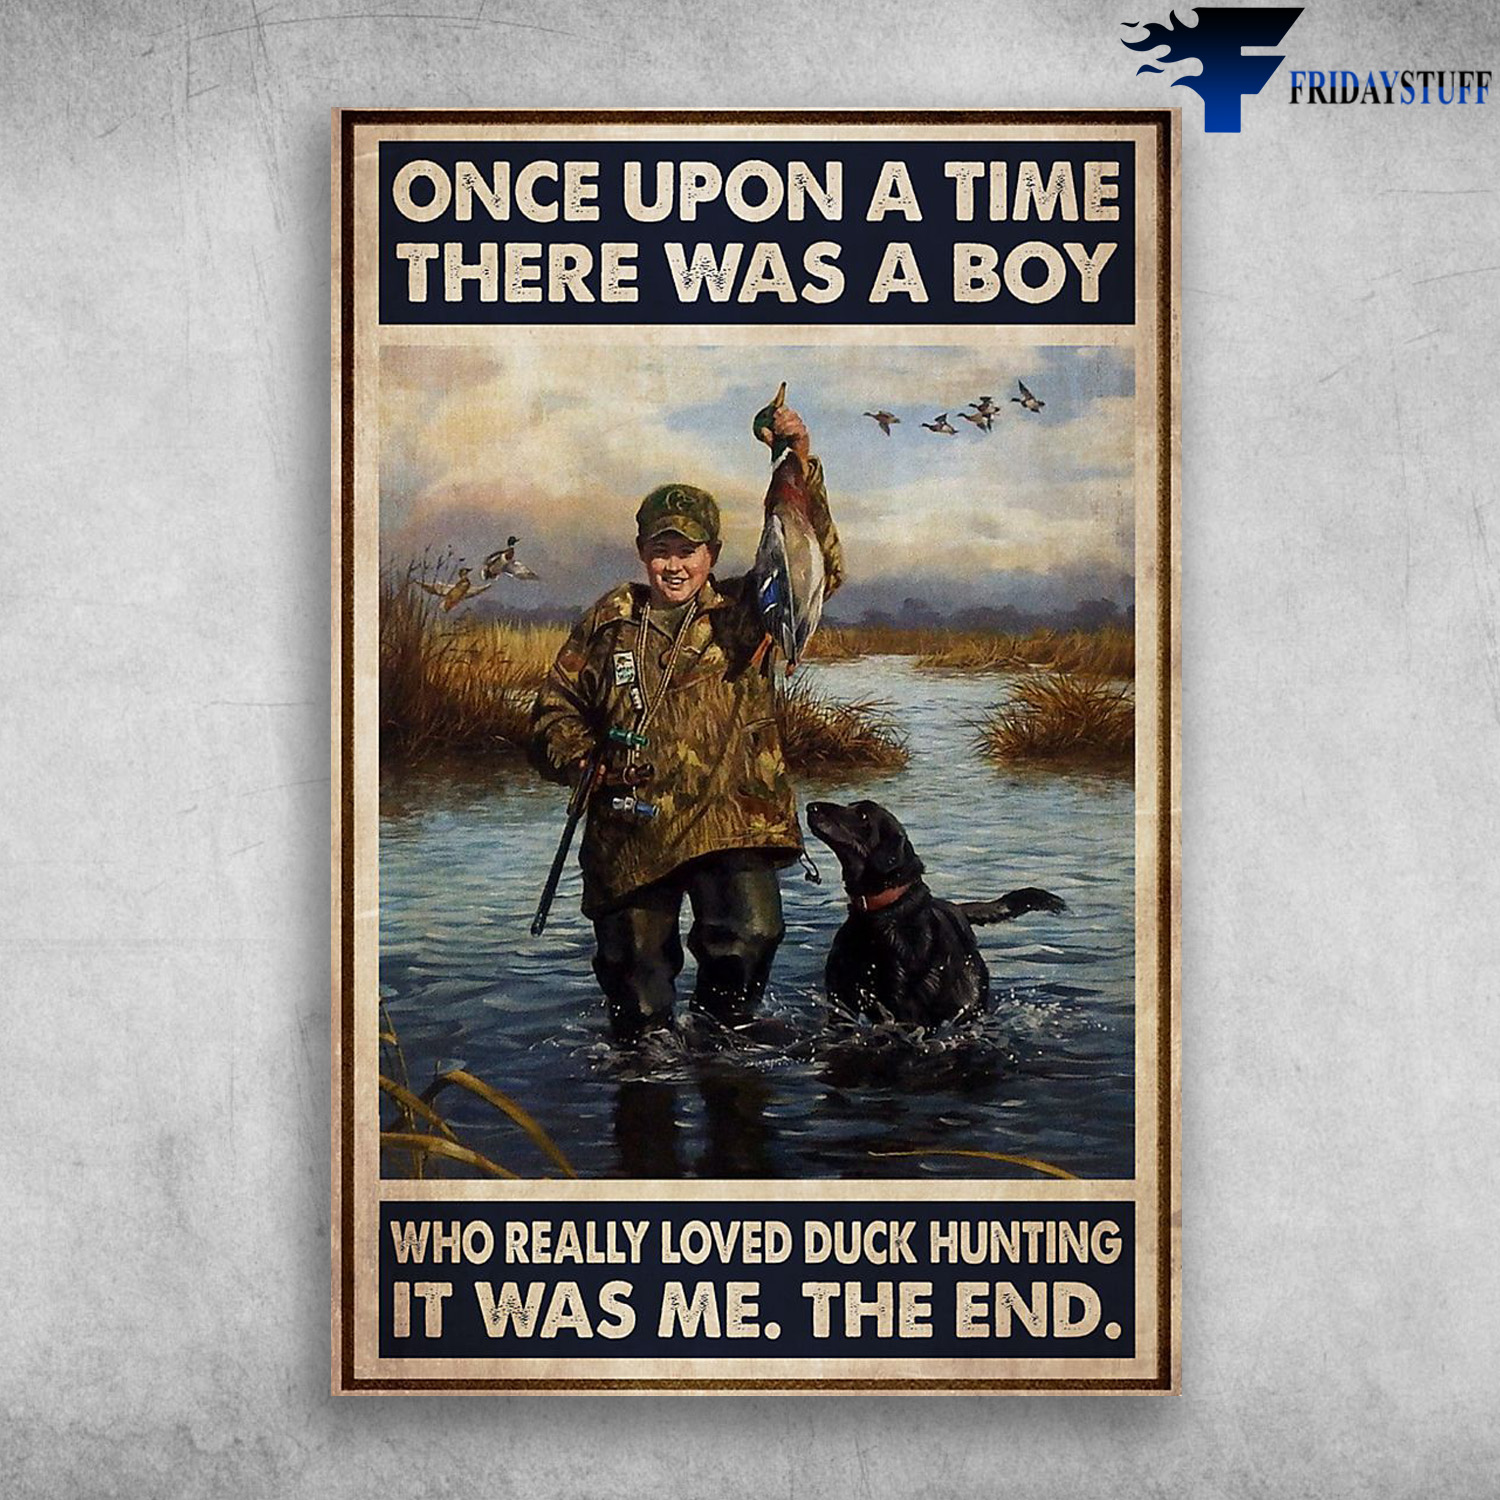 Duck Hunter And A Dog In Swamp - Once Upon A Time There Was A Boy Who Really Loved Duck Hunting